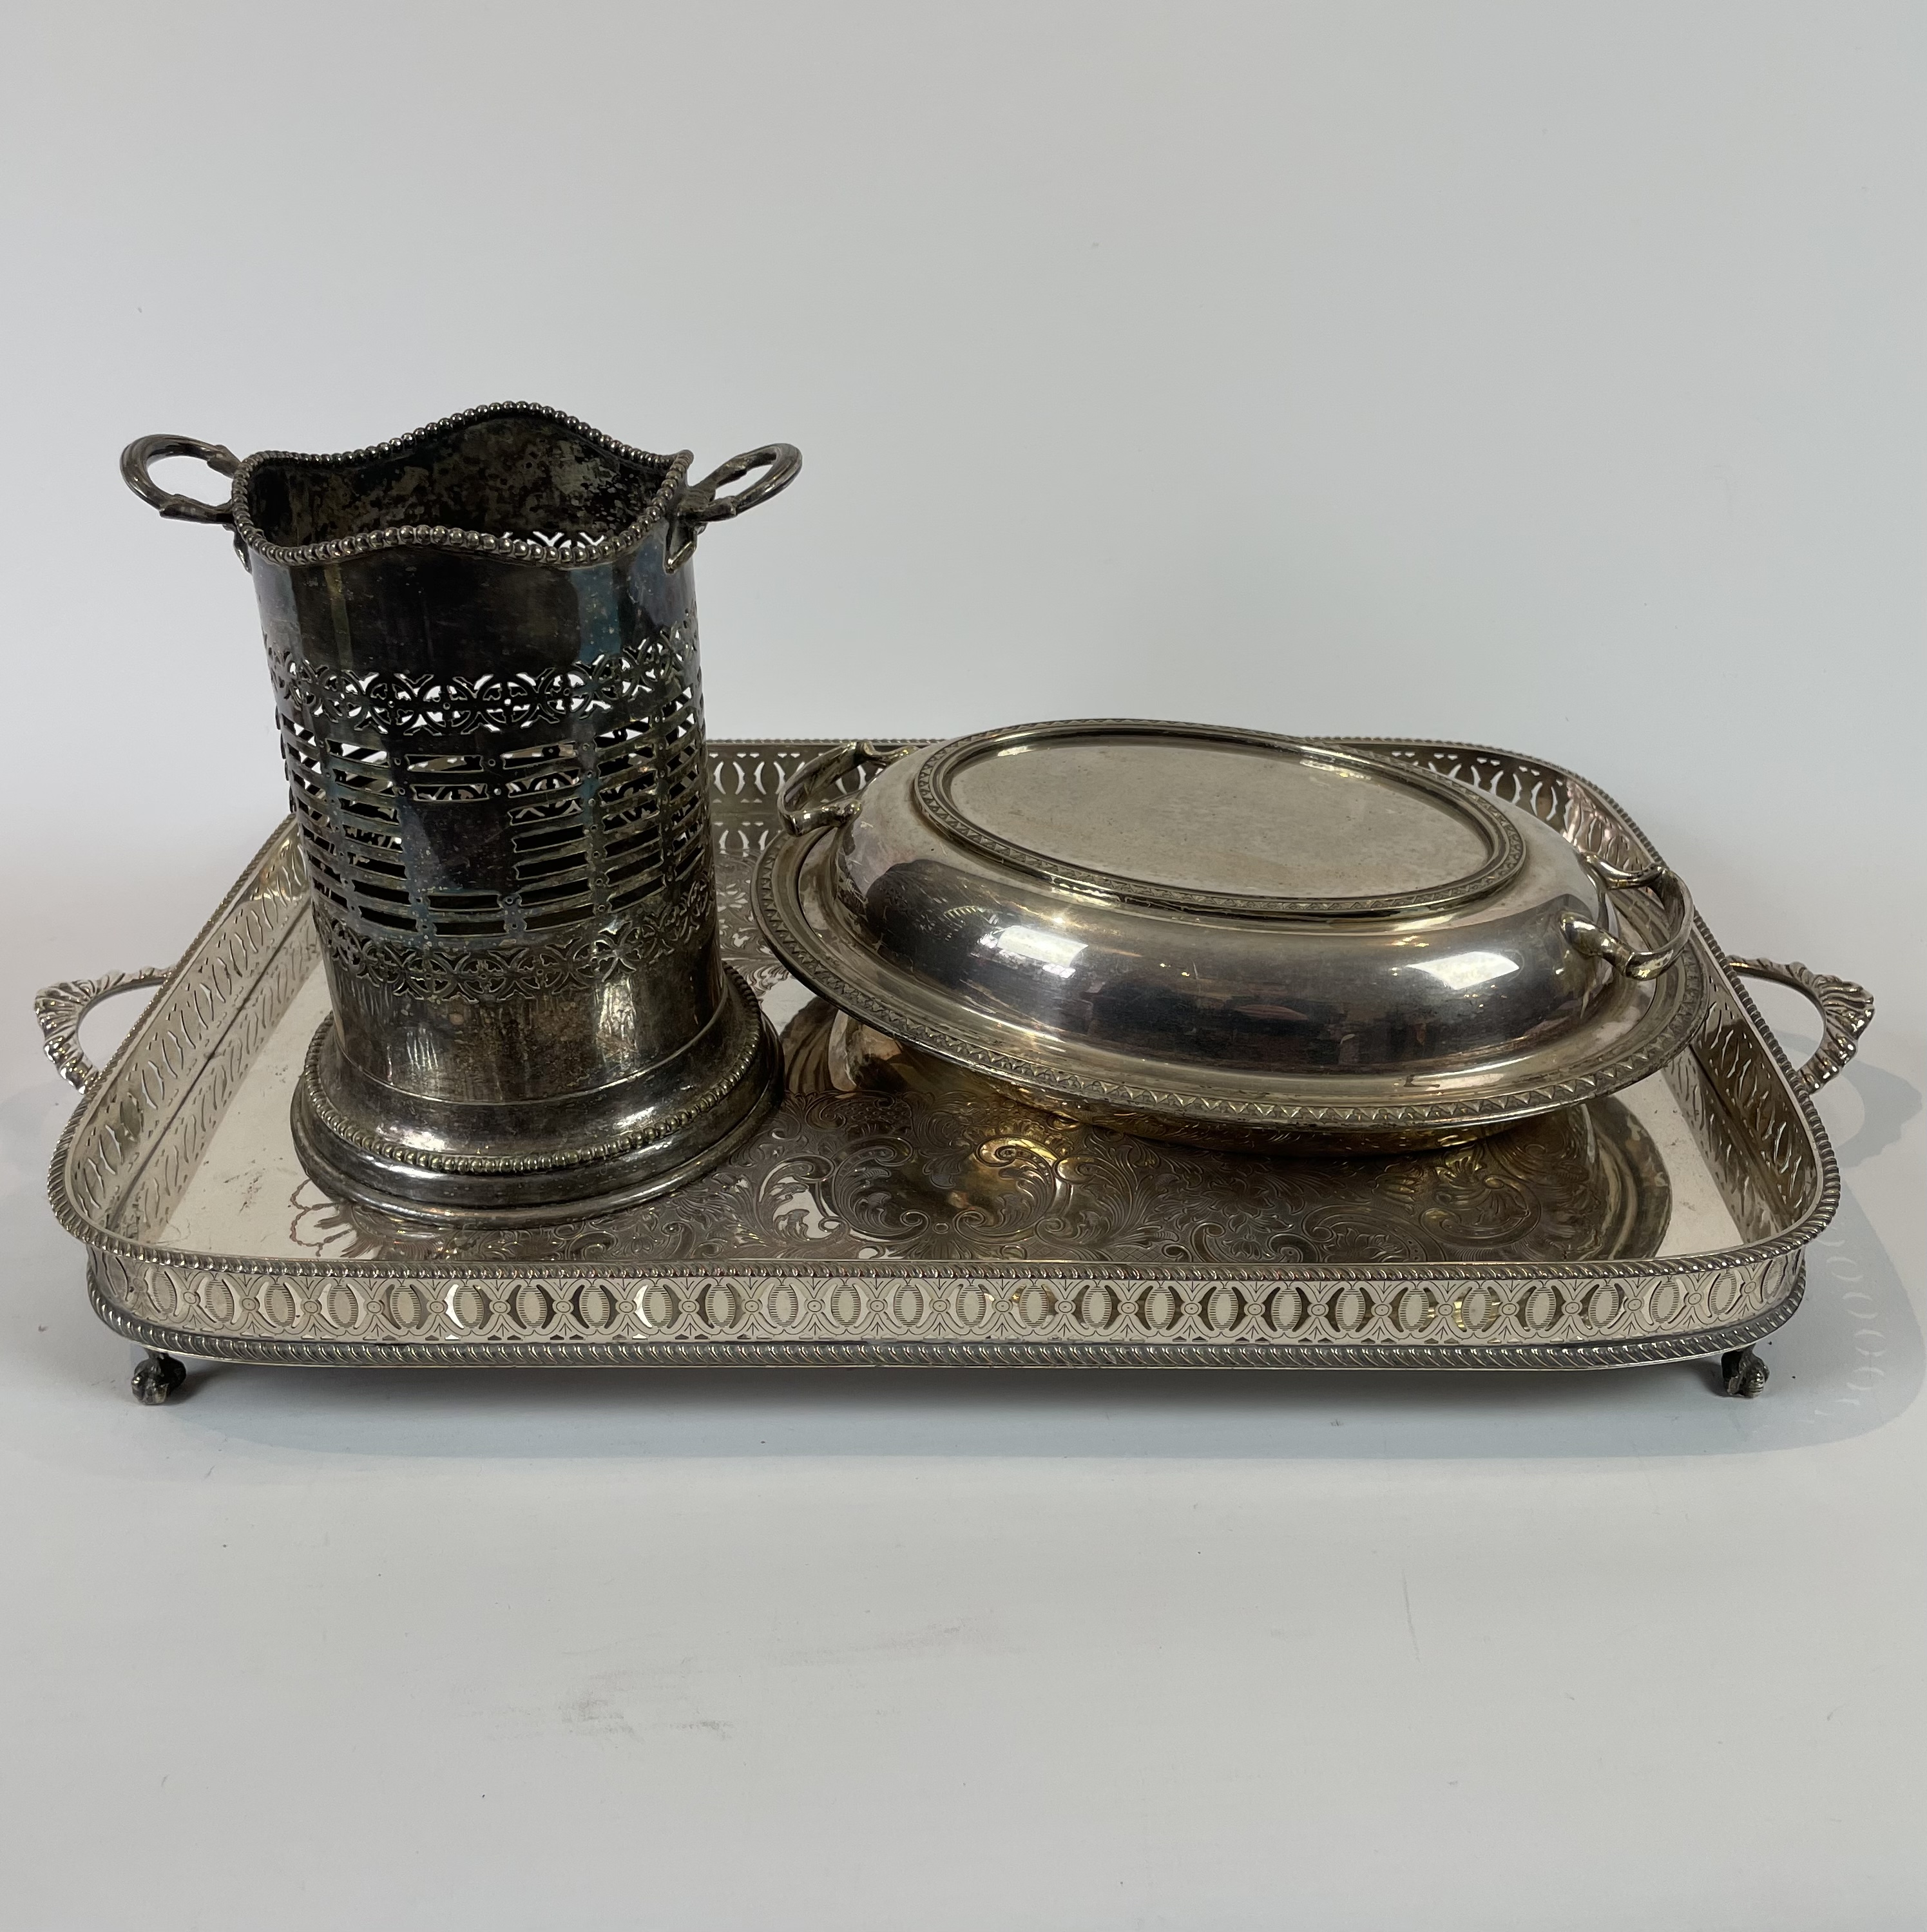 Silver Plated Galleried Tray, Bottle Holder And Chafing Dish